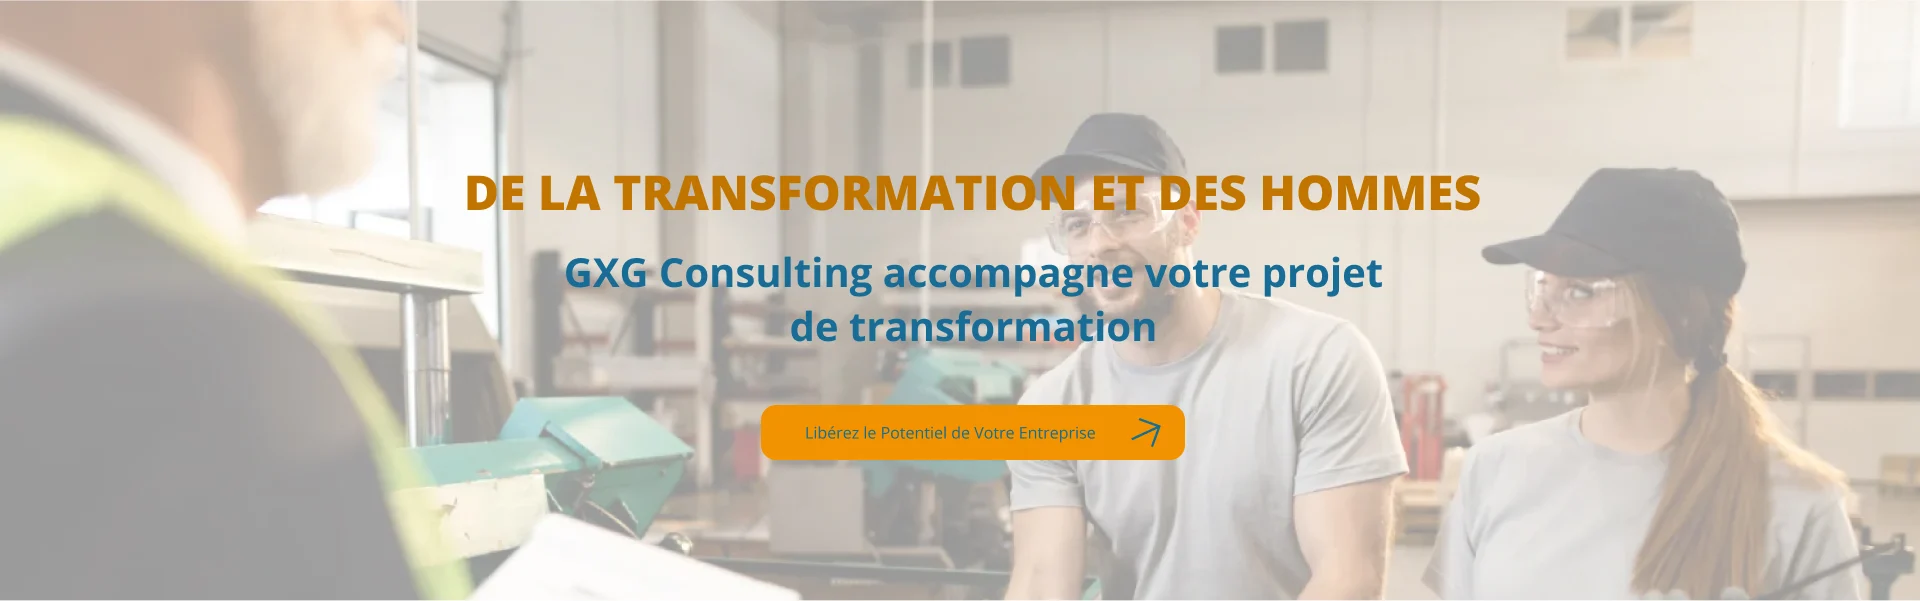 GXG Consulting excellence opérationnelle